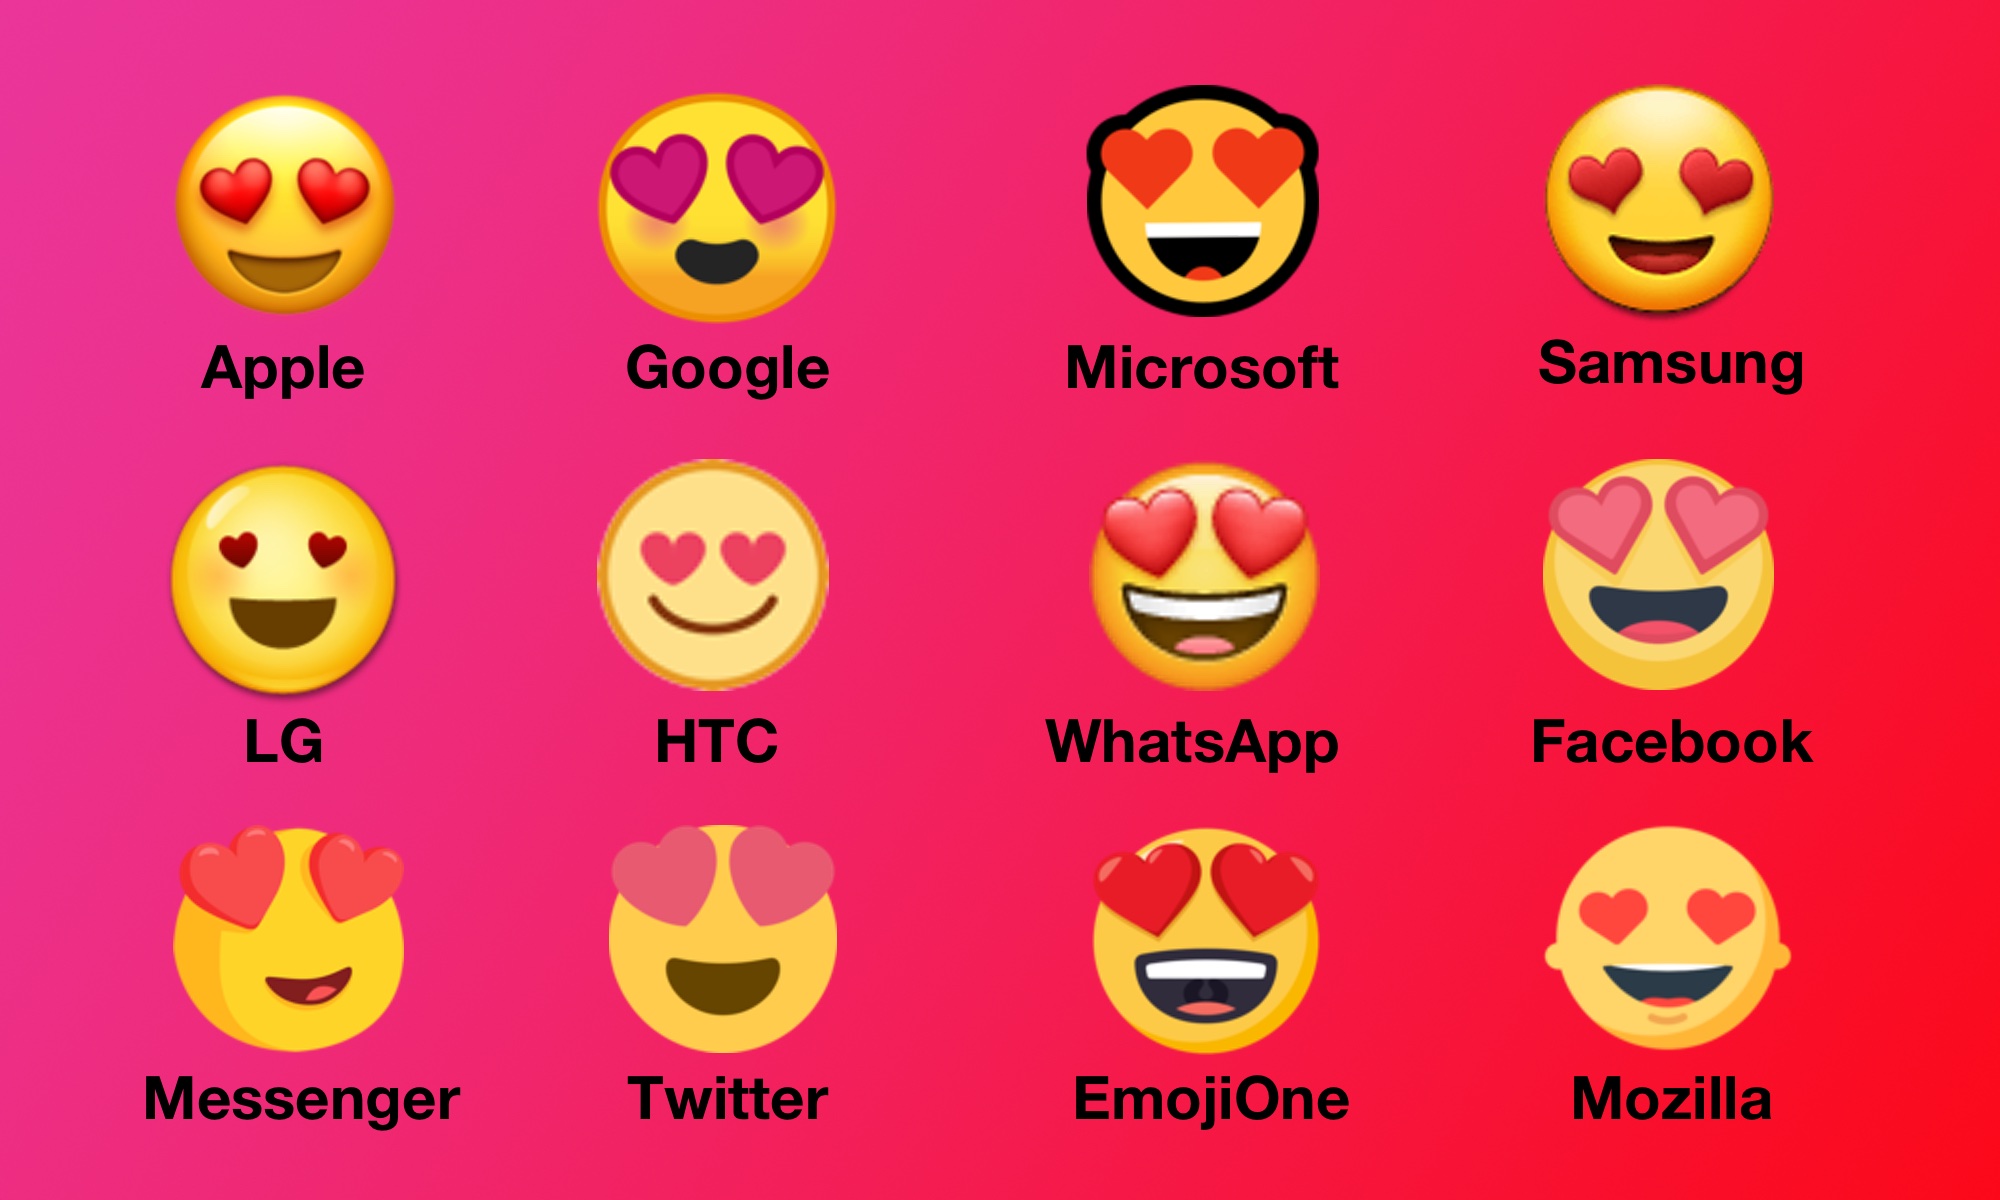 Smiling-Face-With-Heart-Shaped-Eyes-Across-Platforms-Emojipedia